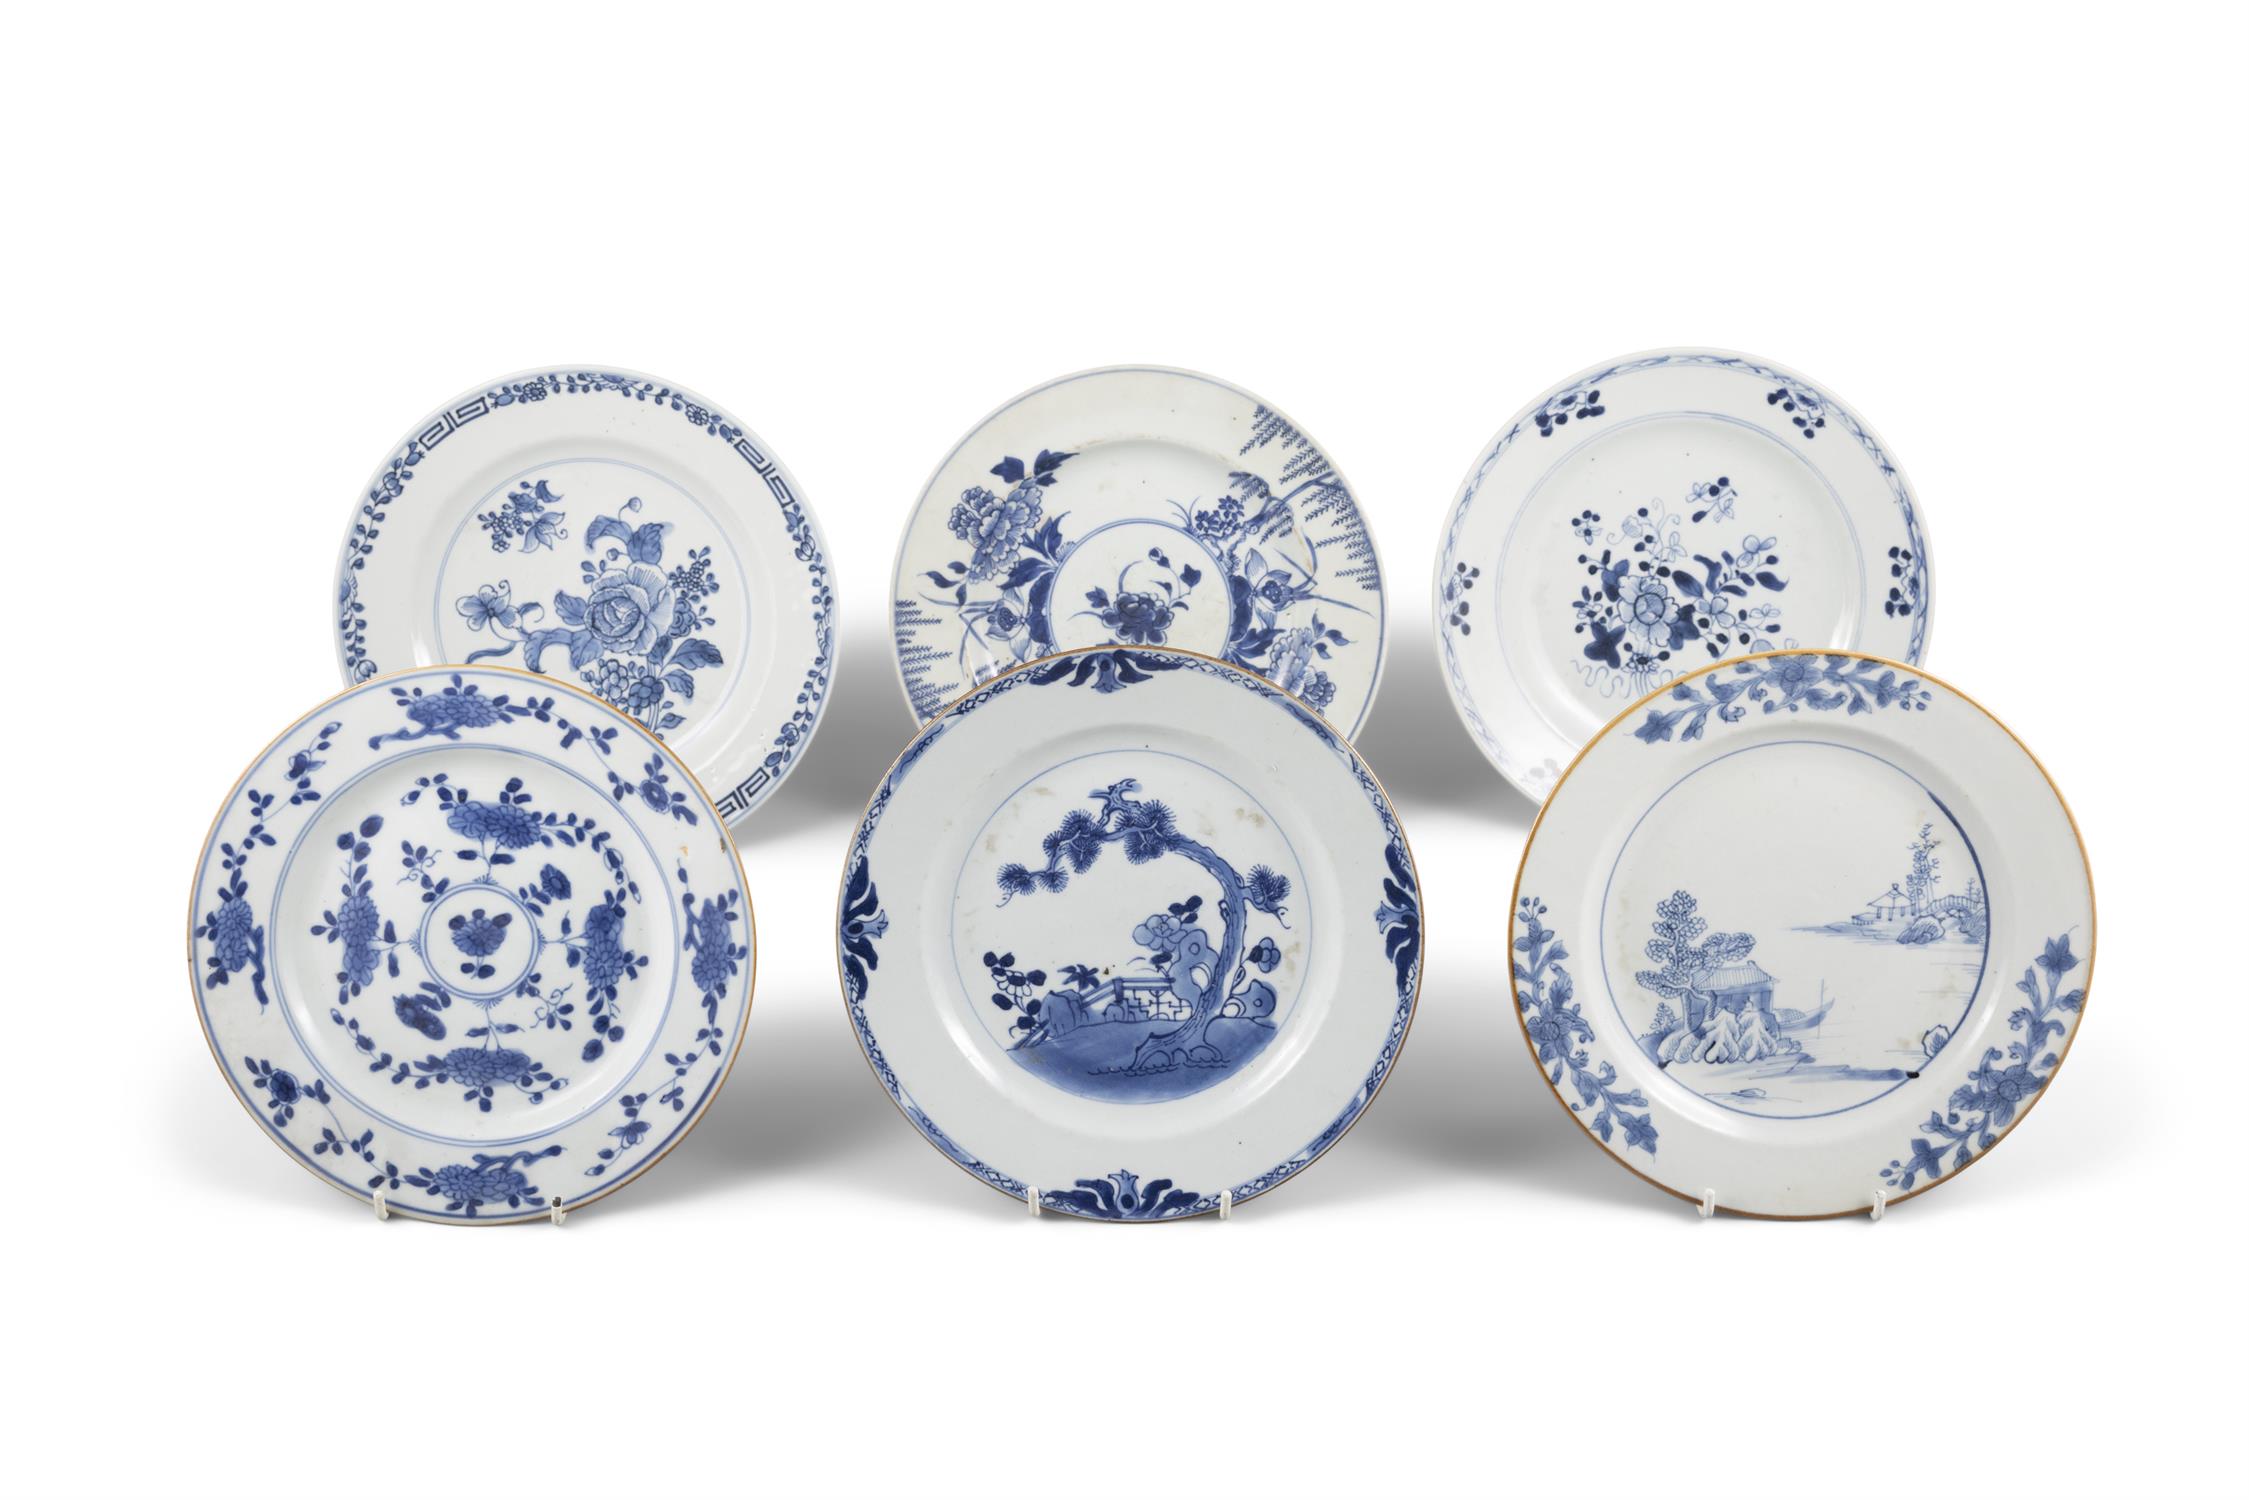 SIX BLUE AND WHITE DISHES WITH FLOWERS AND LANDSCAPE 清乾隆 青花花卉纹盘六件 China, 18th century D: